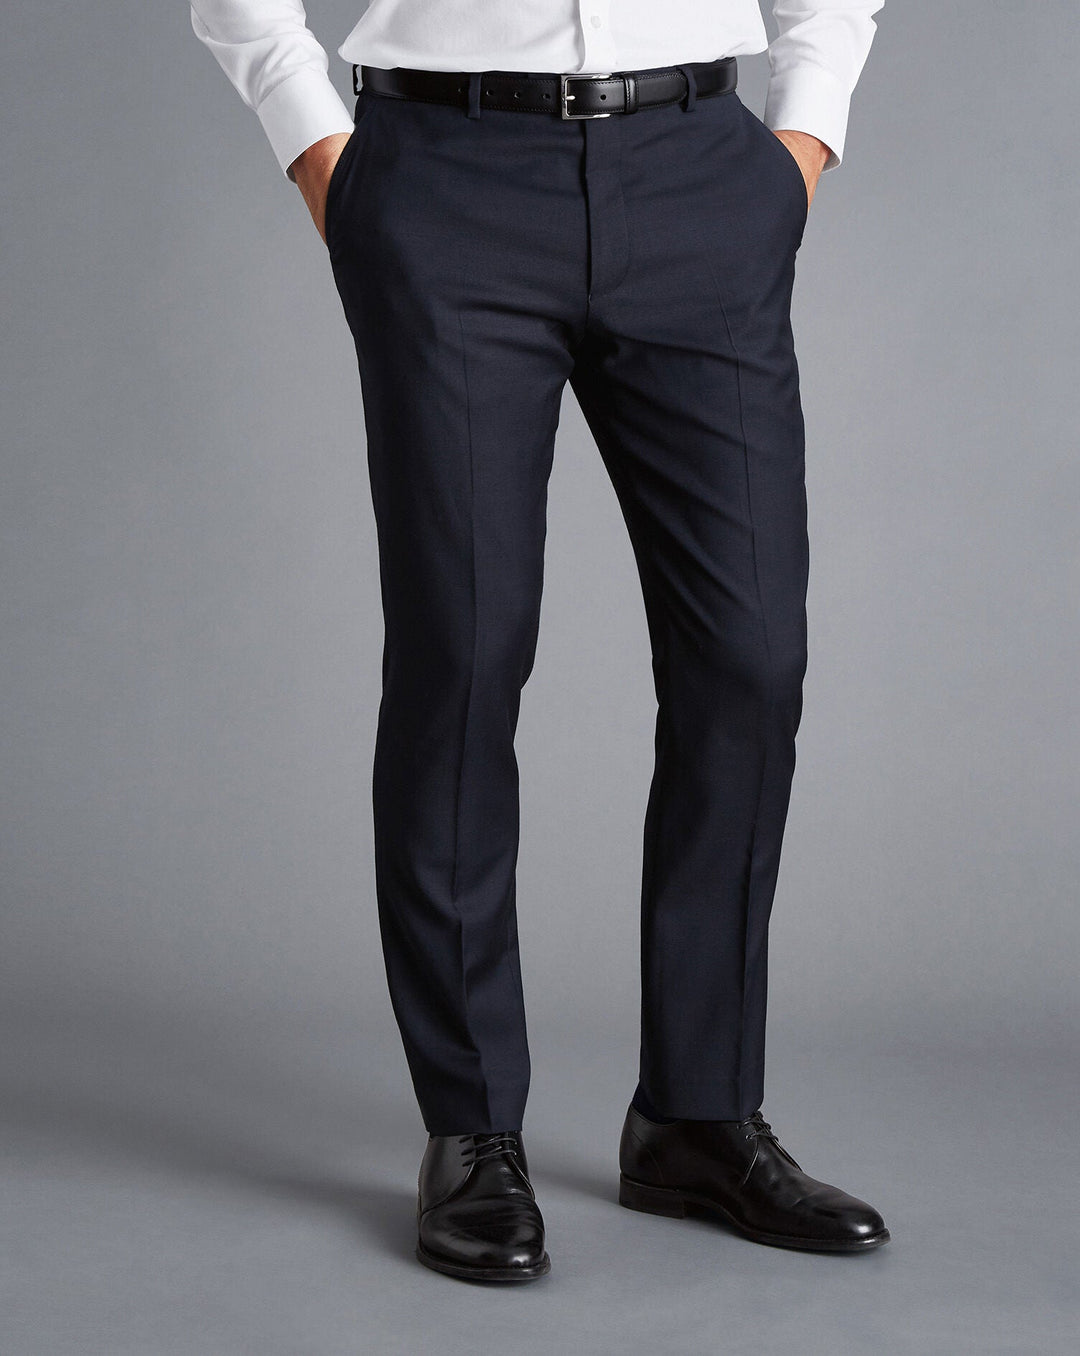 Charles Tyrwhitt Navy Slim Fit Natural Stretch Twill Suit Trouser